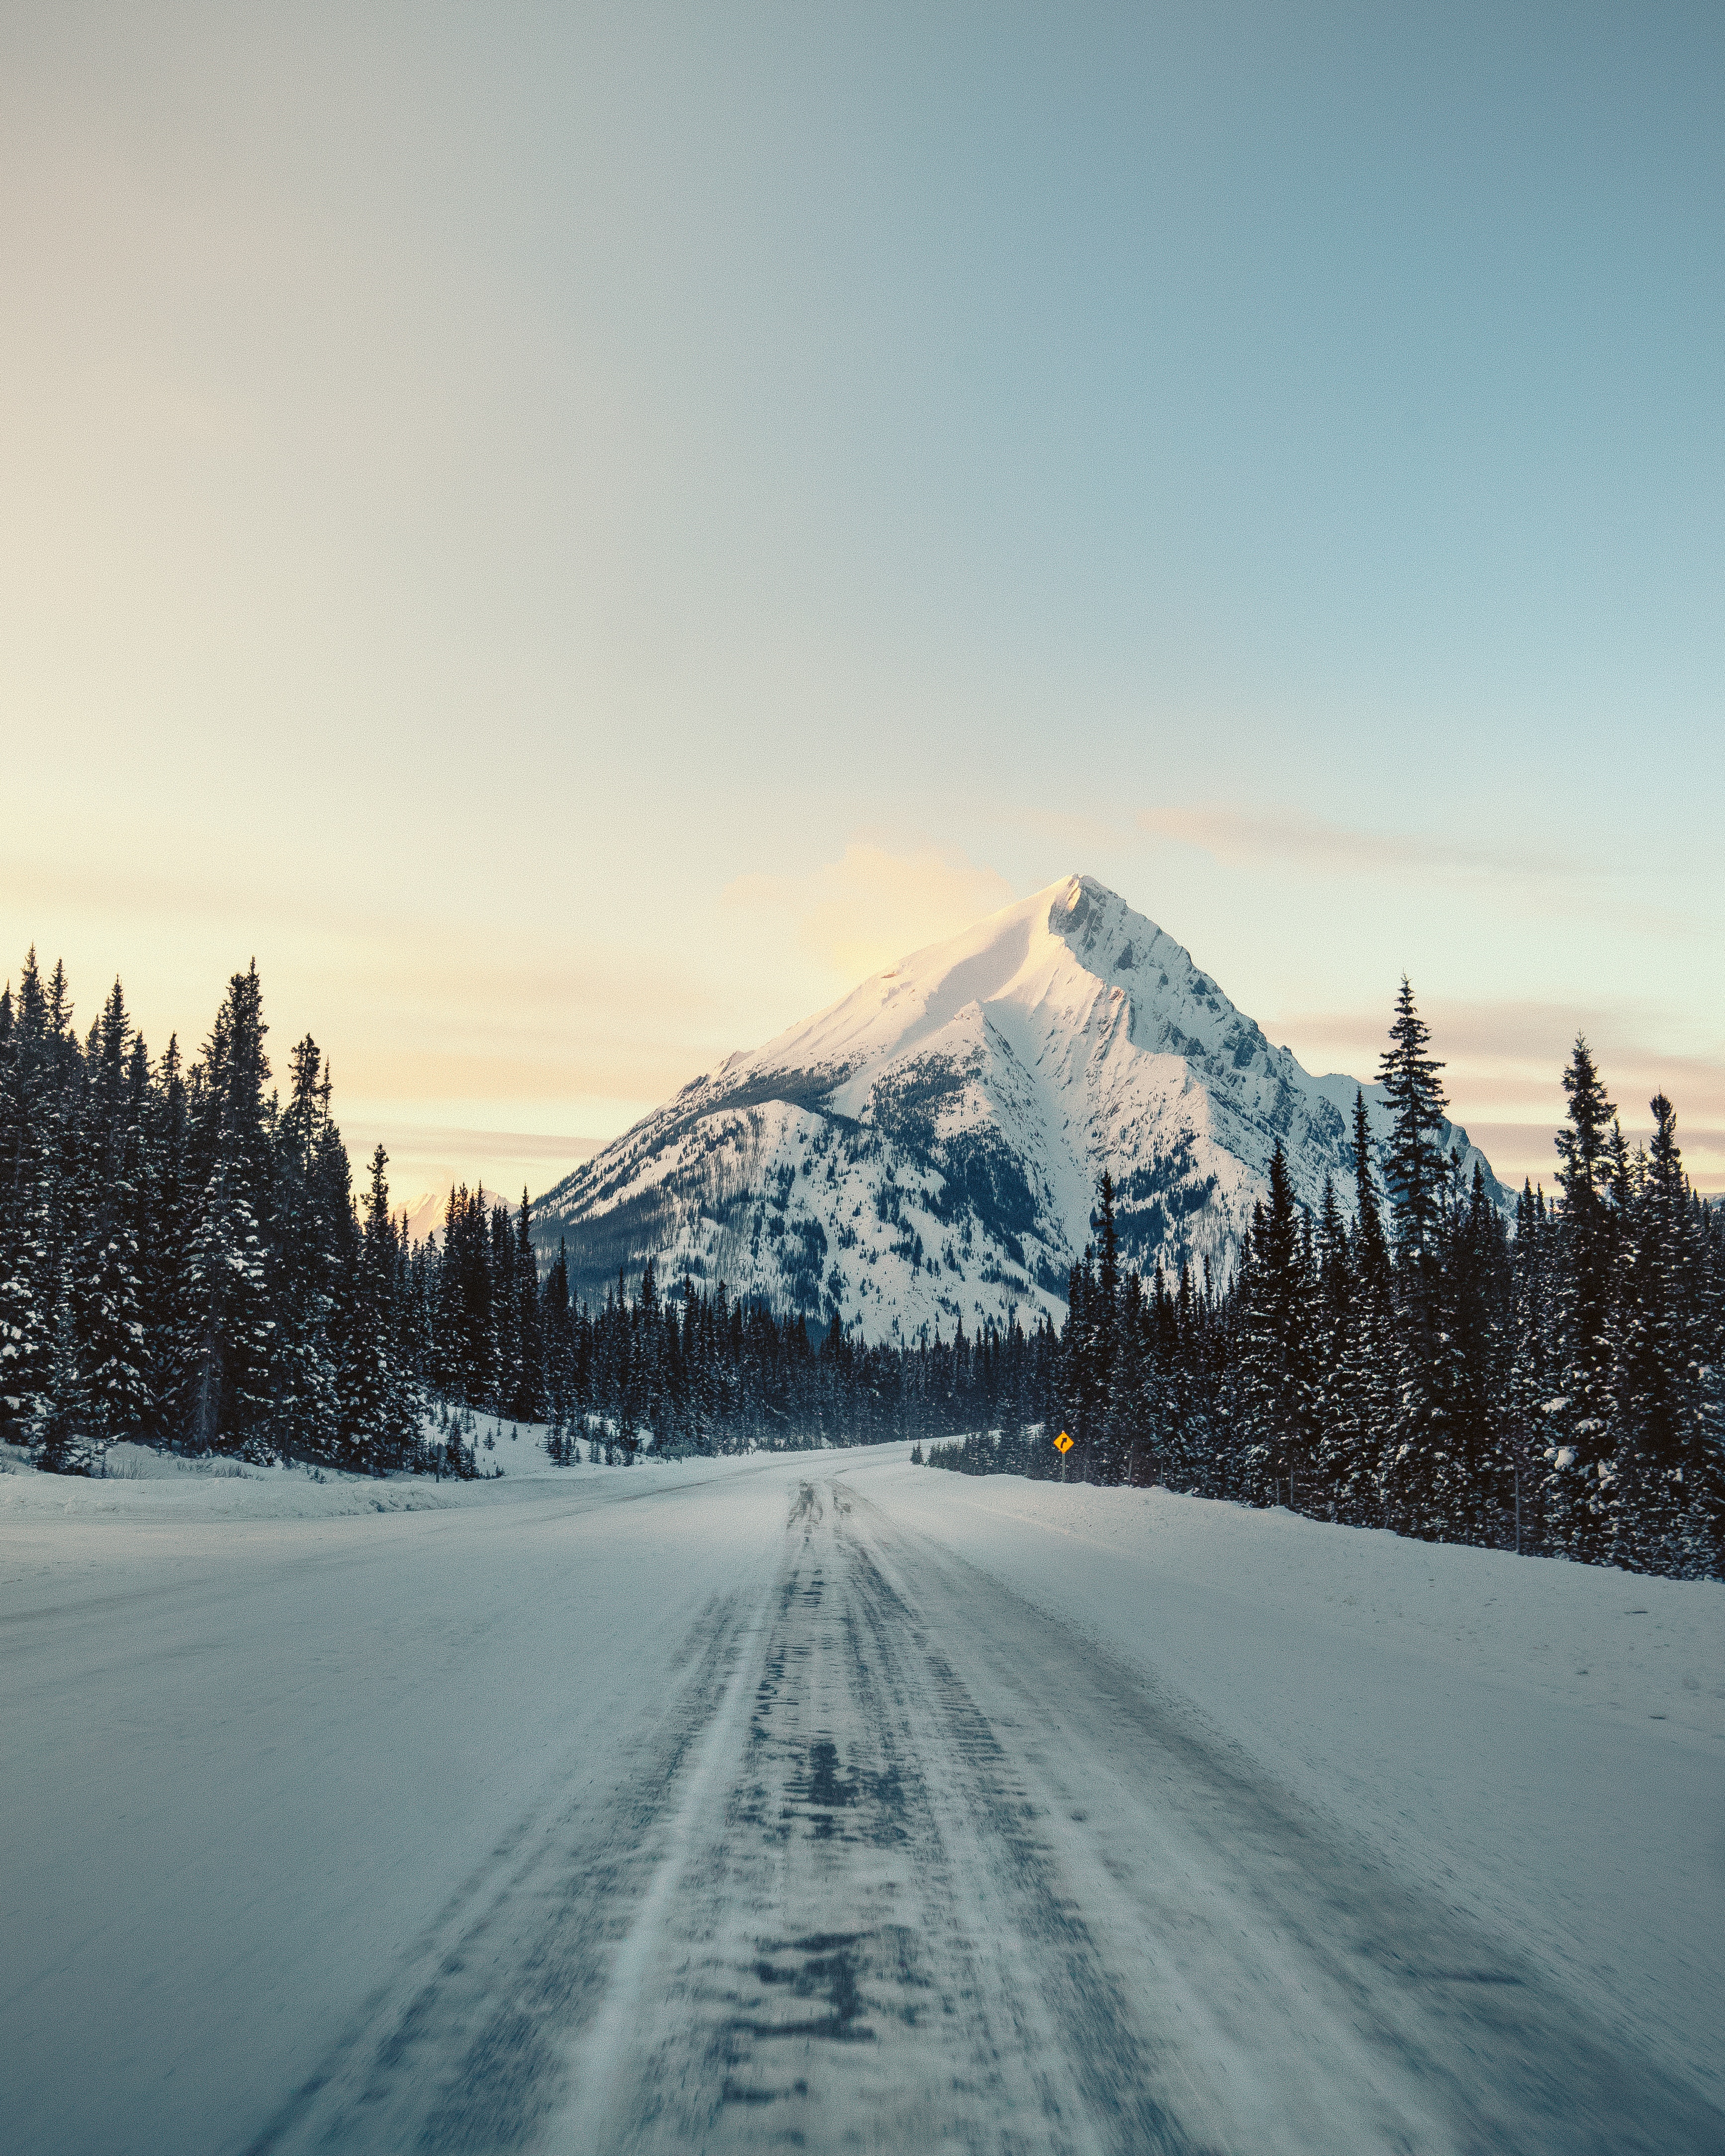 snow, road, landscape, winter, nature, trees, mountain lock screen backgrounds